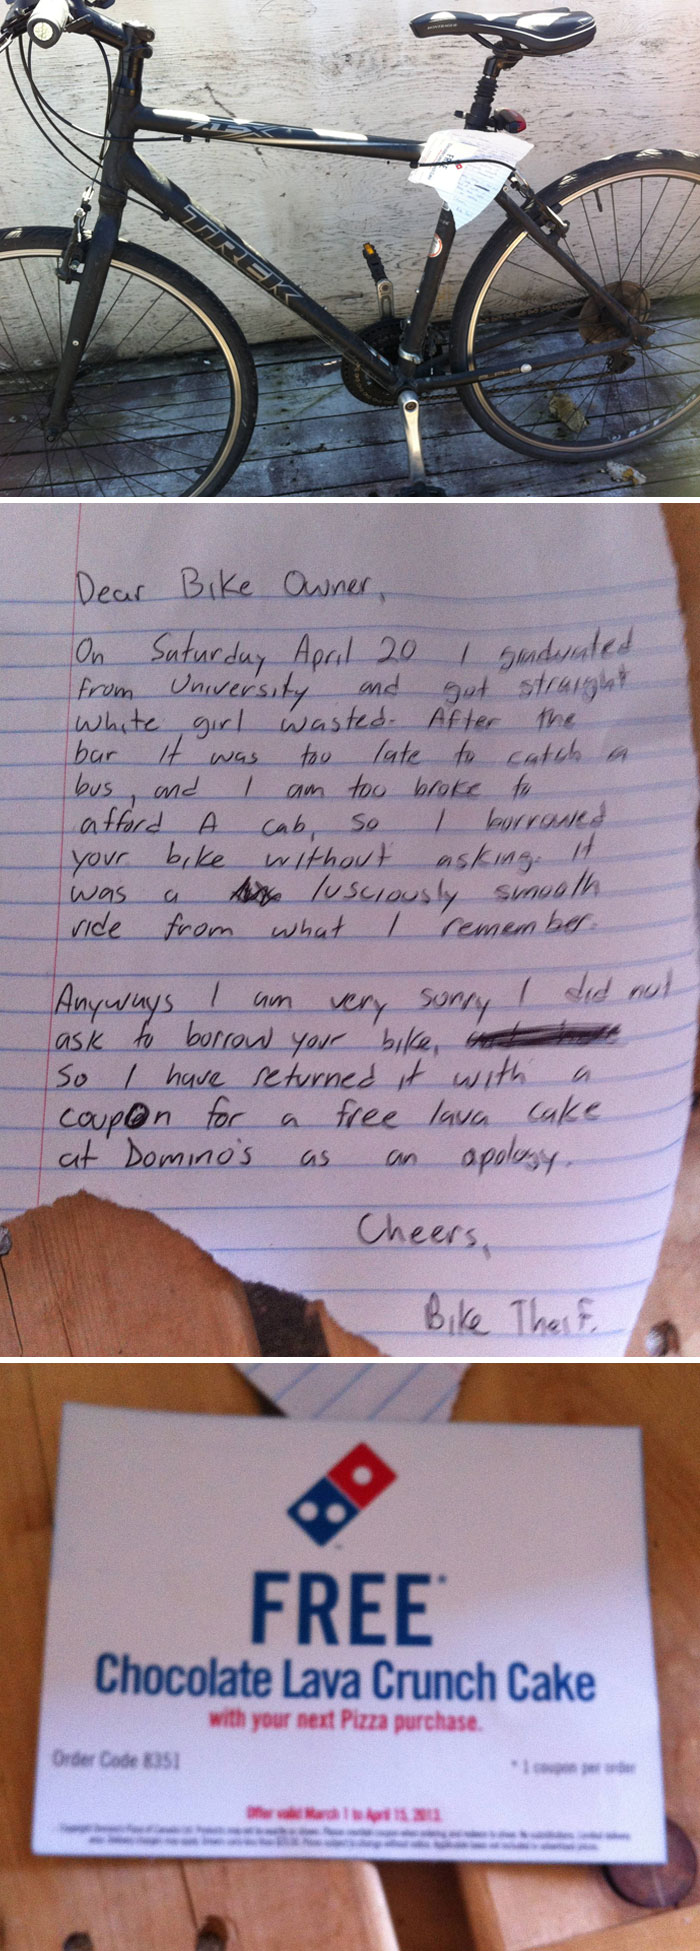 Three Nights Ago, My Bike Was Stolen. It Just Turned Up Back In My Yard This Morning With This Note. Ain't Even Mad